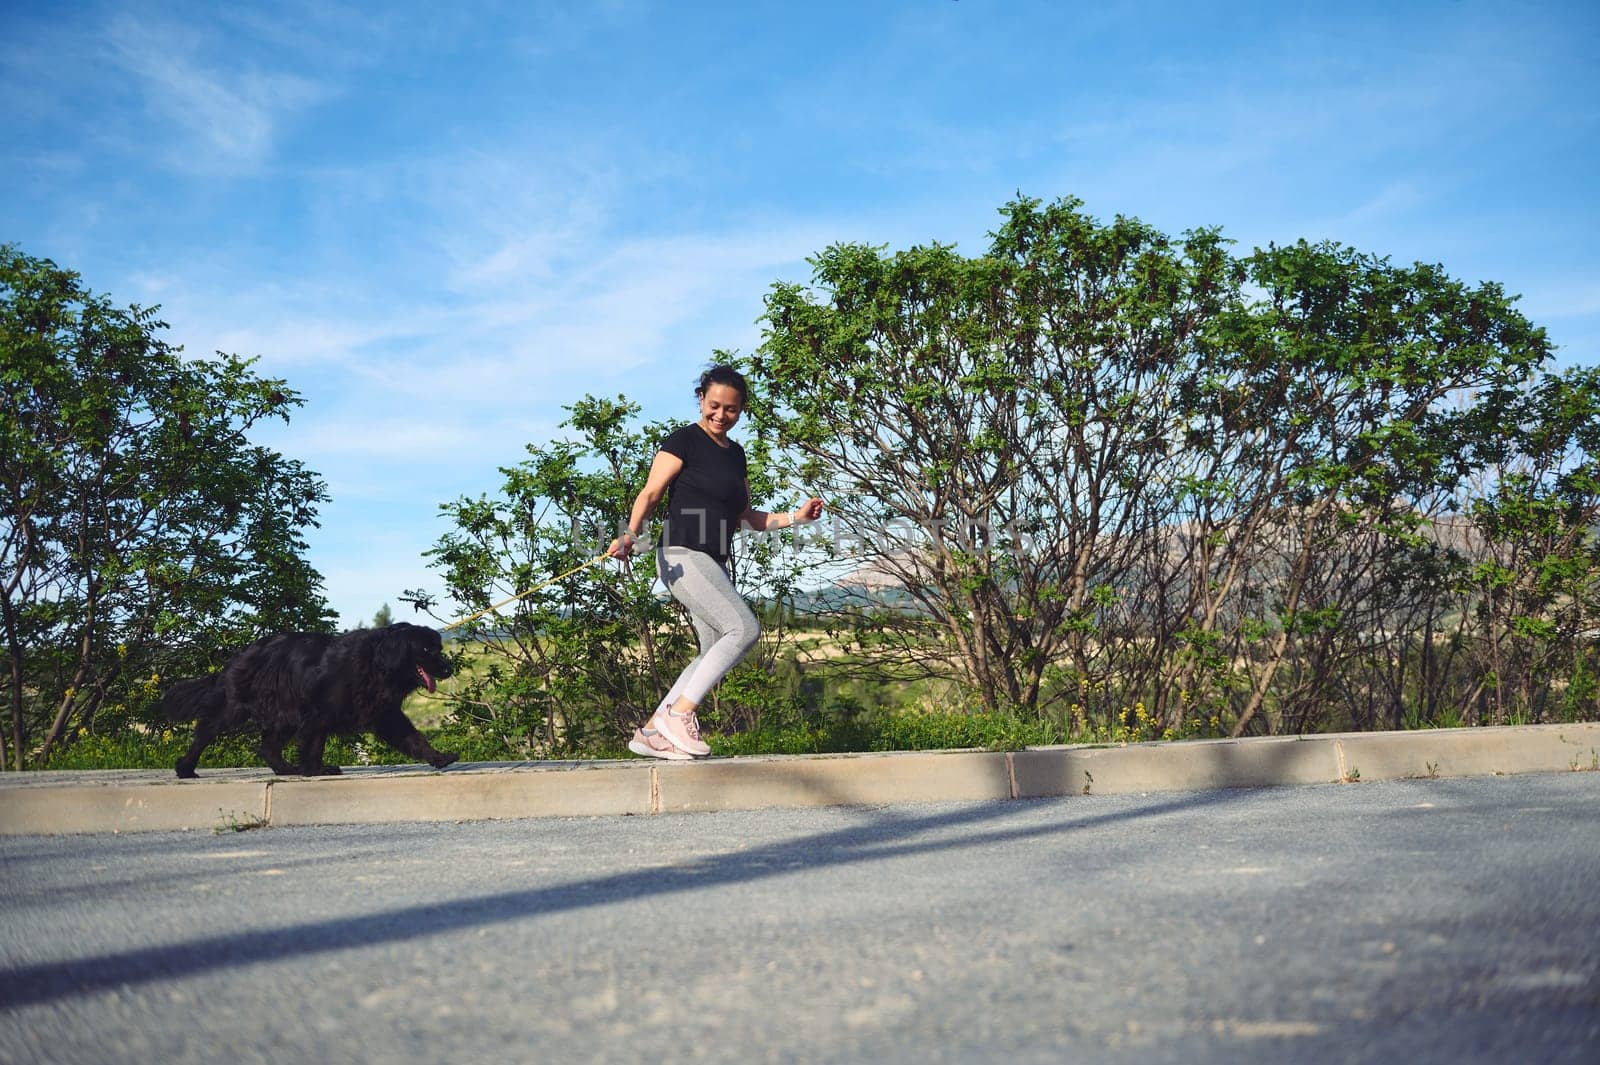 Full length authentic portrait of a young active woman jogging with her dog as a fun way to exercise outdoors. Playing pets concept